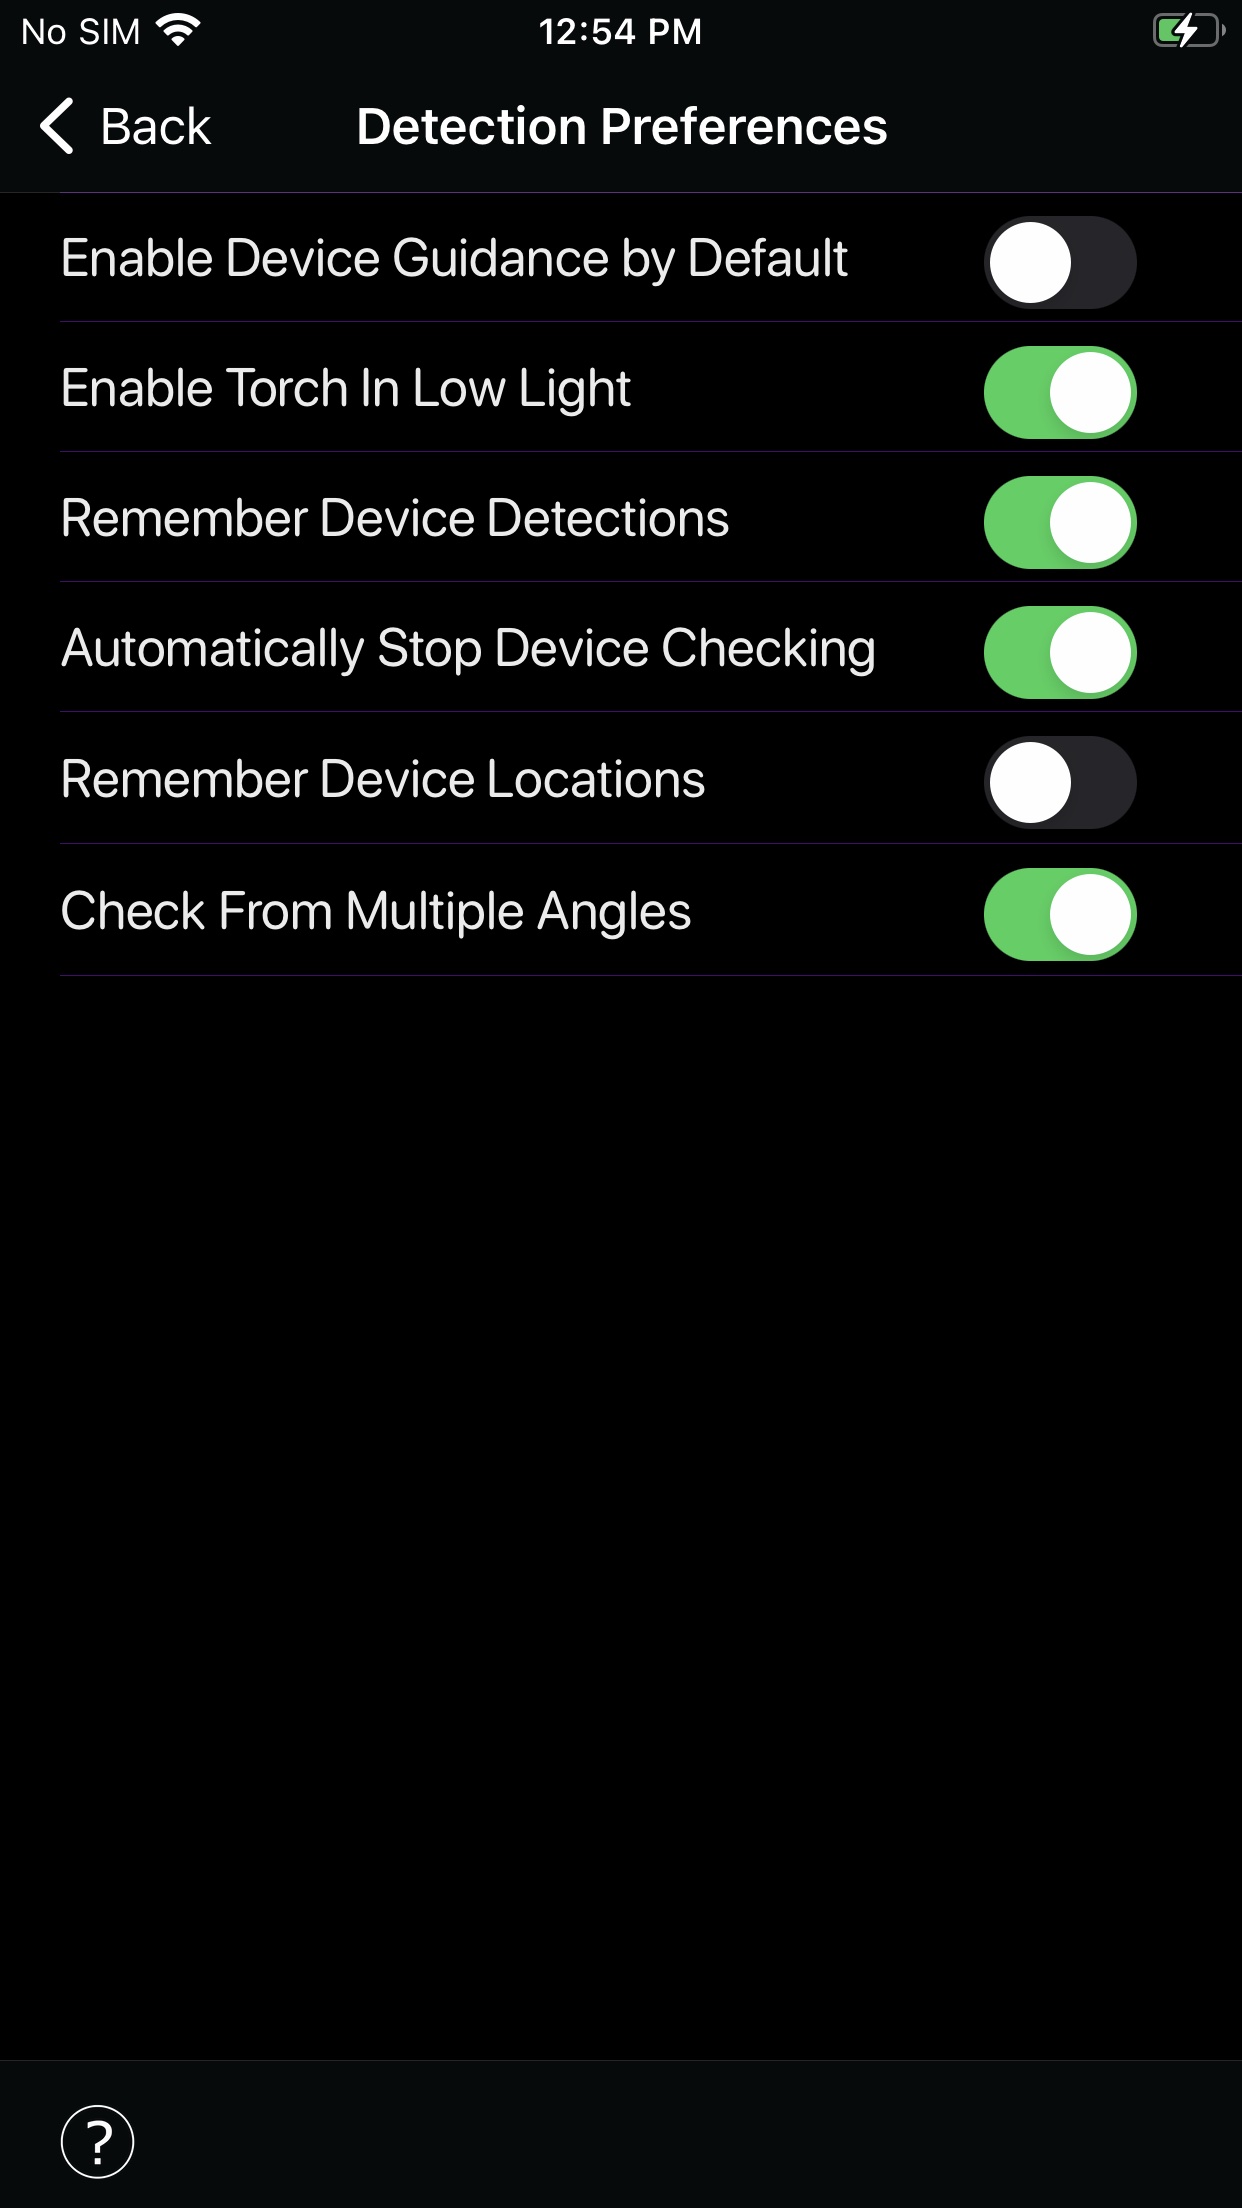 Device Detection Preferences